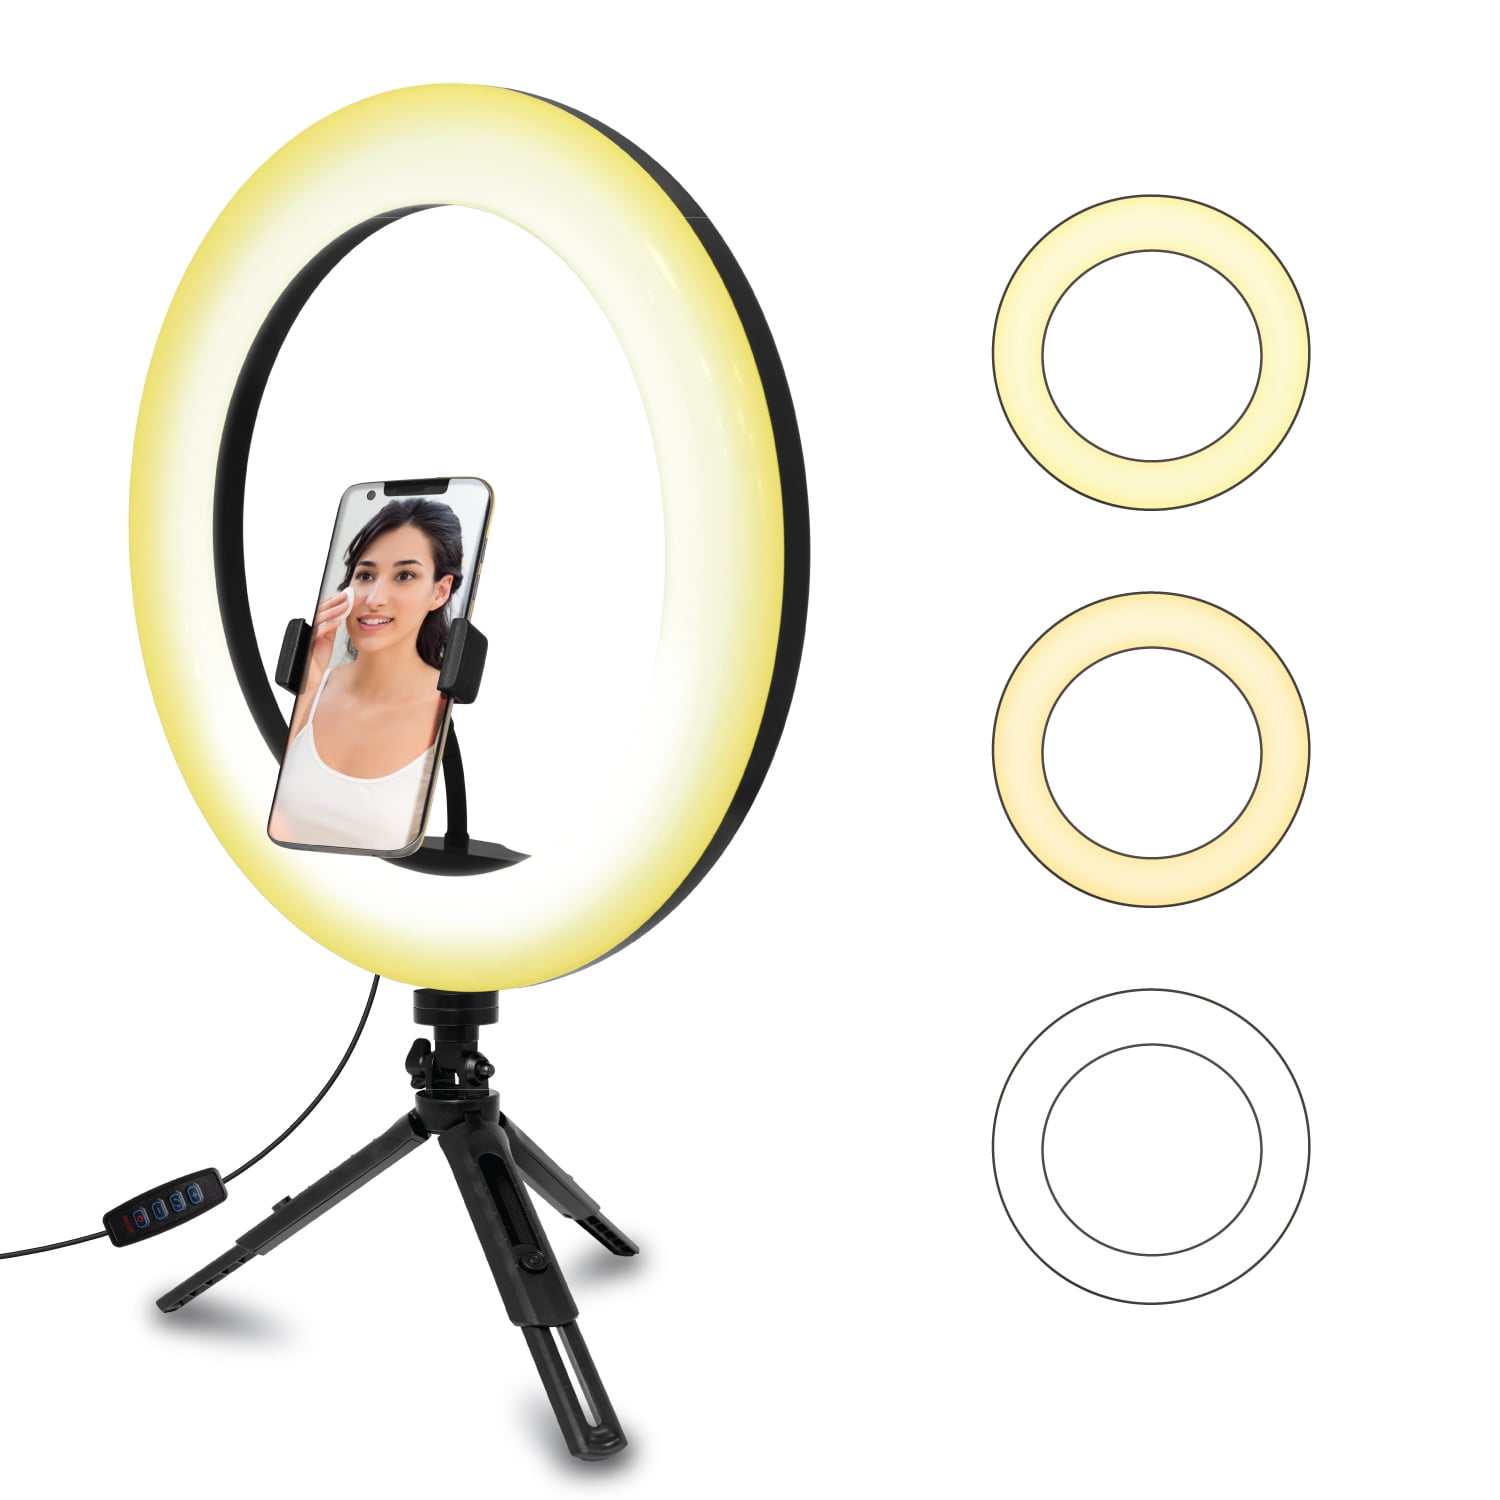 Buy 8inch LED Desktop Ring Light Selfie Lamp with Desktop Tripod Stand USB  Plug Replaent for YouTube TIK Tok Live Streaming Online at Low Prices in  India - Amazon.in